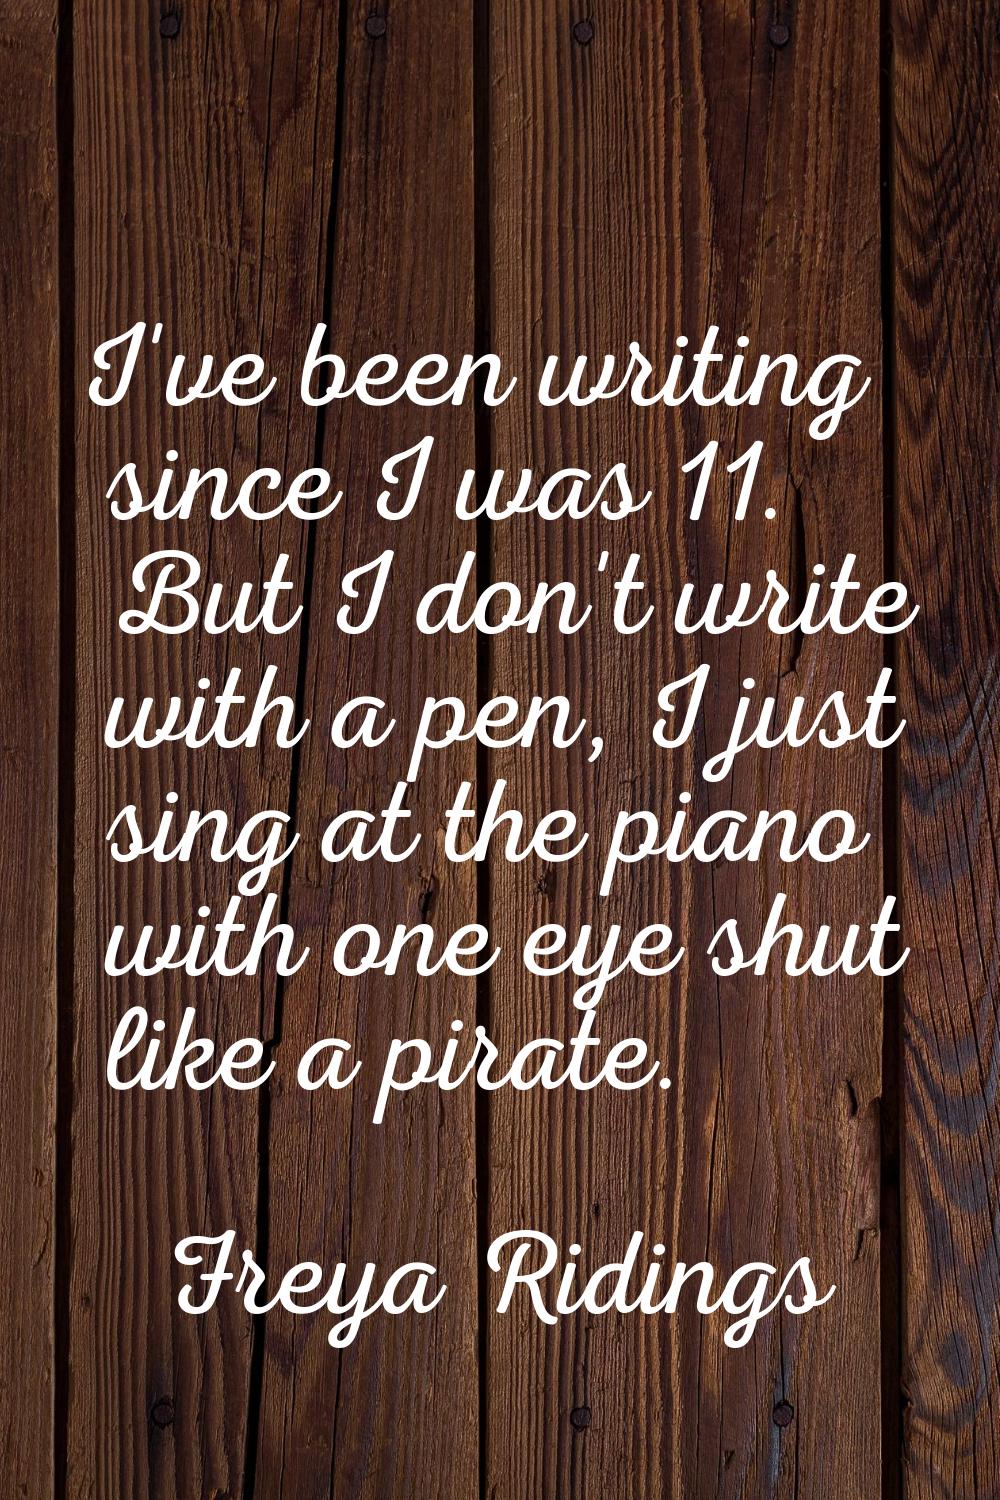 I've been writing since I was 11. But I don't write with a pen, I just sing at the piano with one e